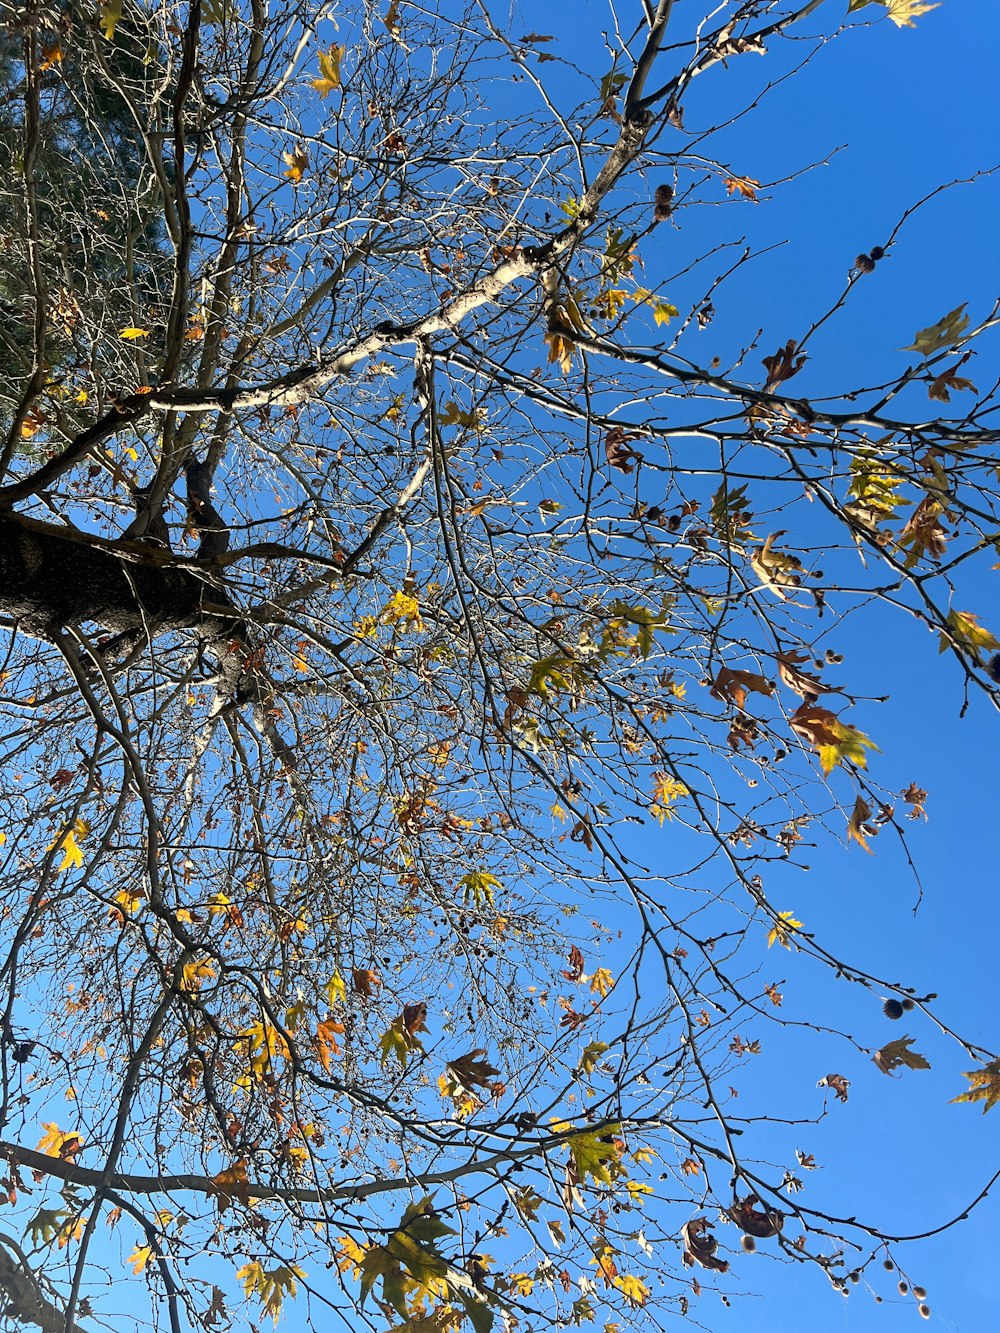 the branches of a tree with yellow leaves against a blue sky